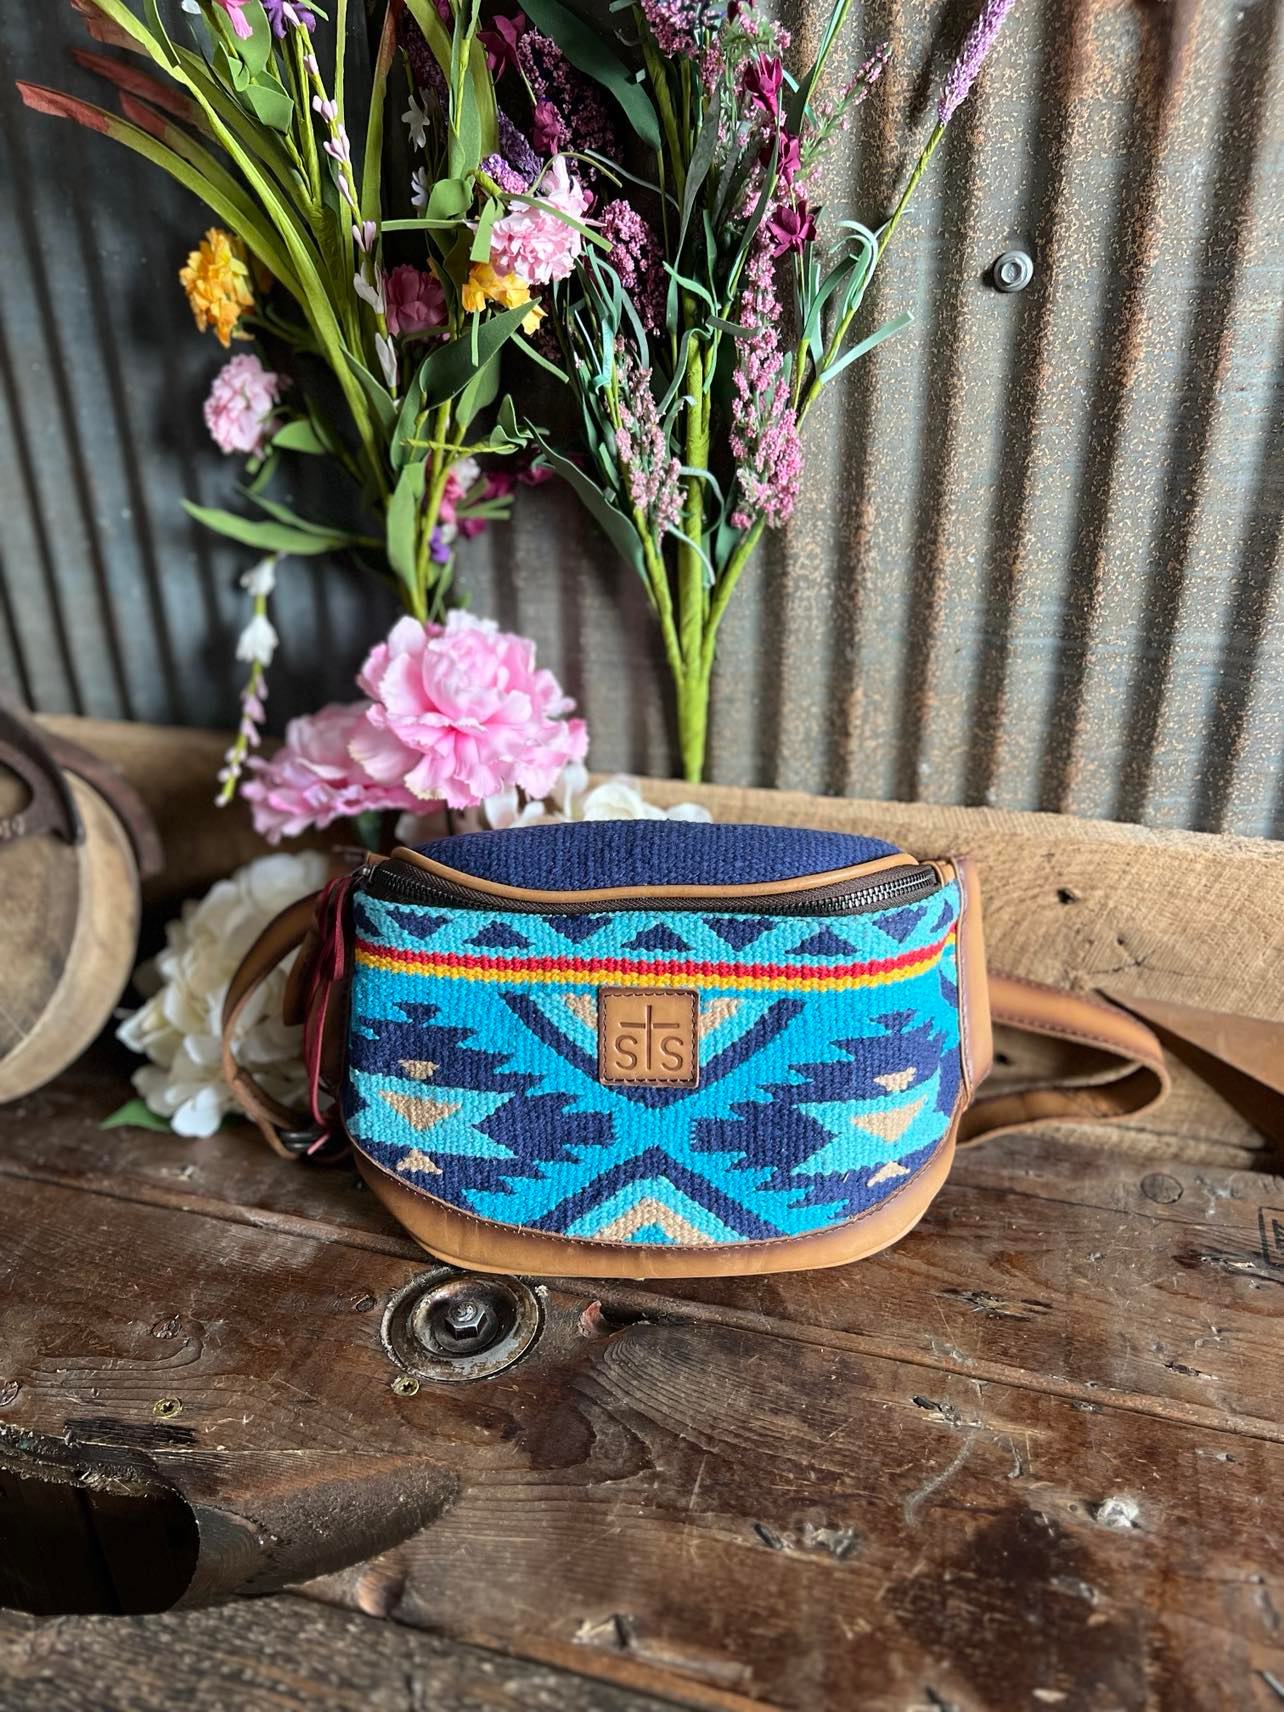 Sts Mojave Belt Bag-Handbags-Carrol STS Ranchwear-Lucky J Boots & More, Women's, Men's, & Kids Western Store Located in Carthage, MO